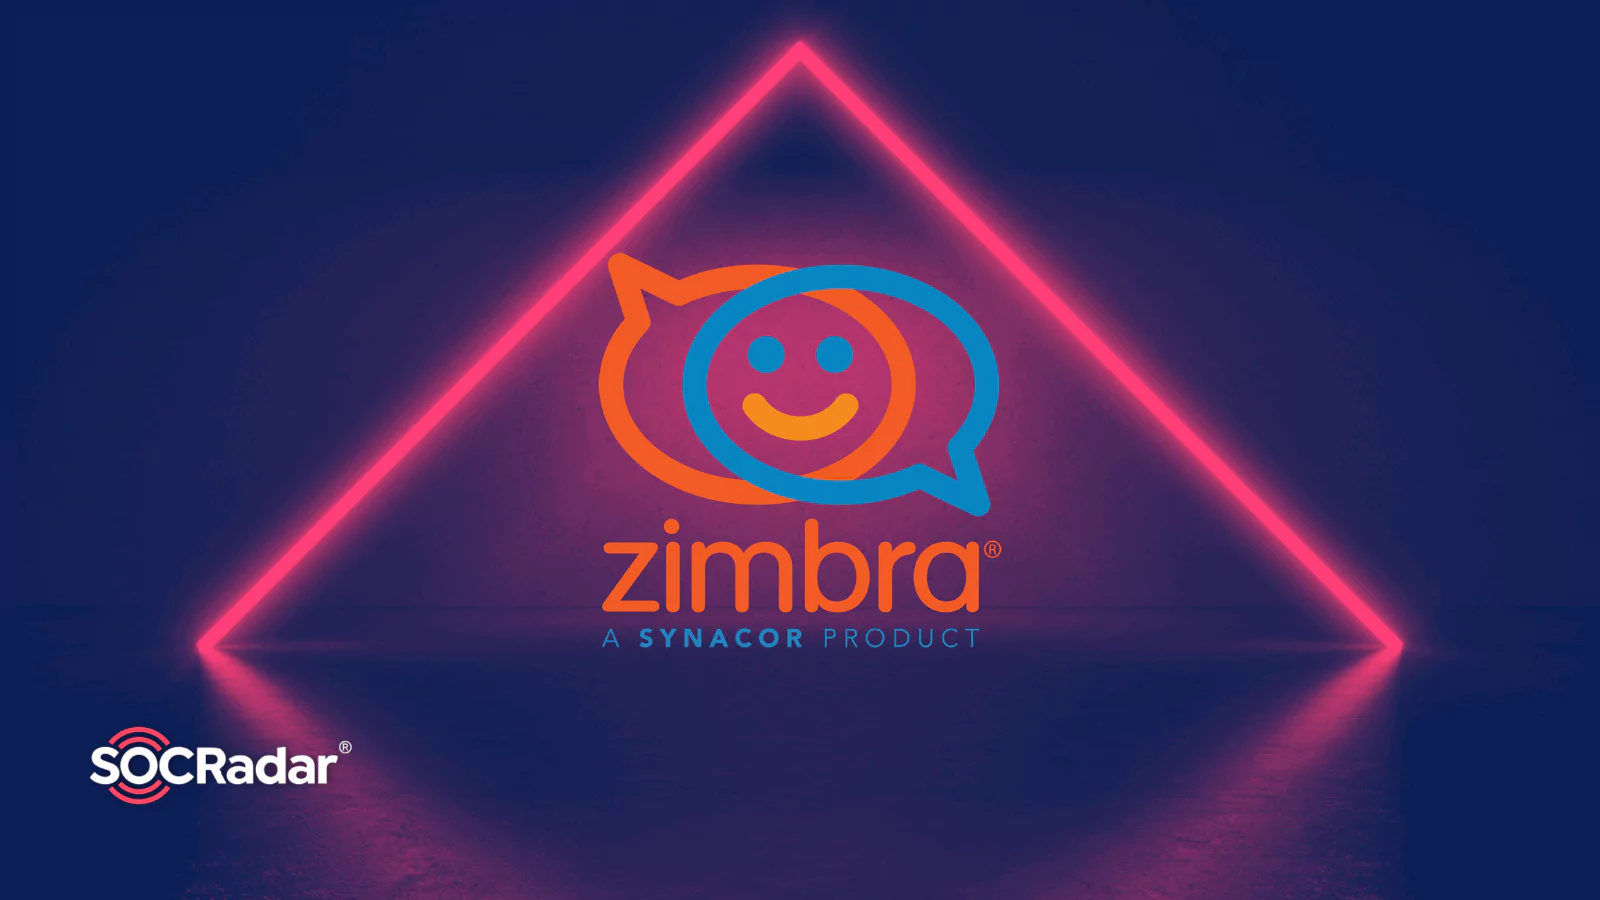 https://socradar.io/wp-content/uploads/2022/10/unpatched-rce-vulnerability-in-zimbra-actively-exploited.png